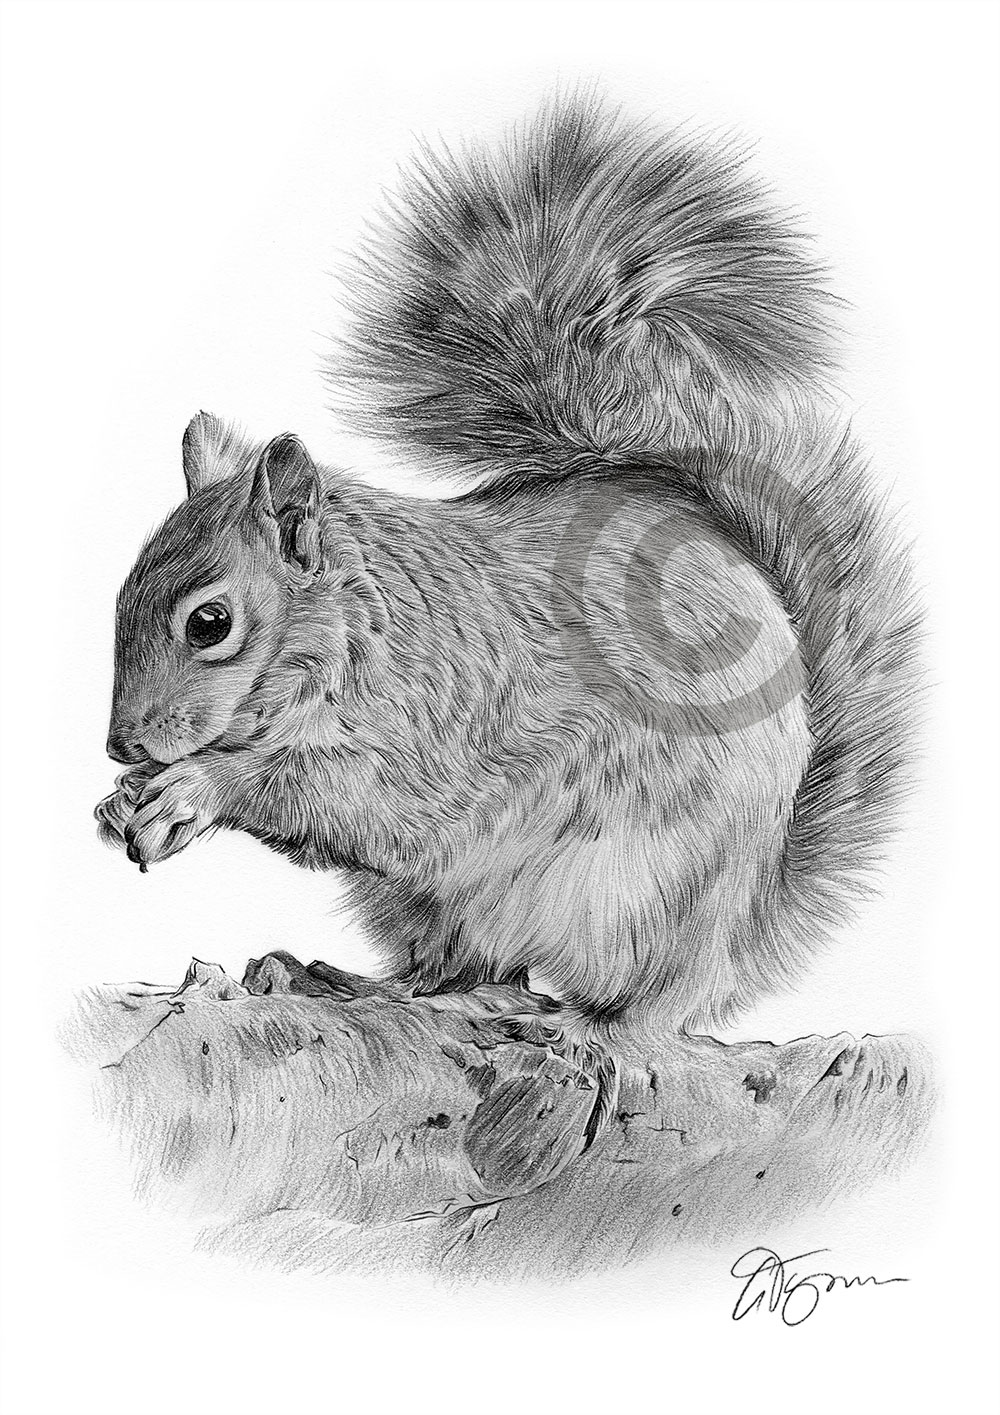 Pencil drawing of a young grey squirrel by artist Gary Tymon